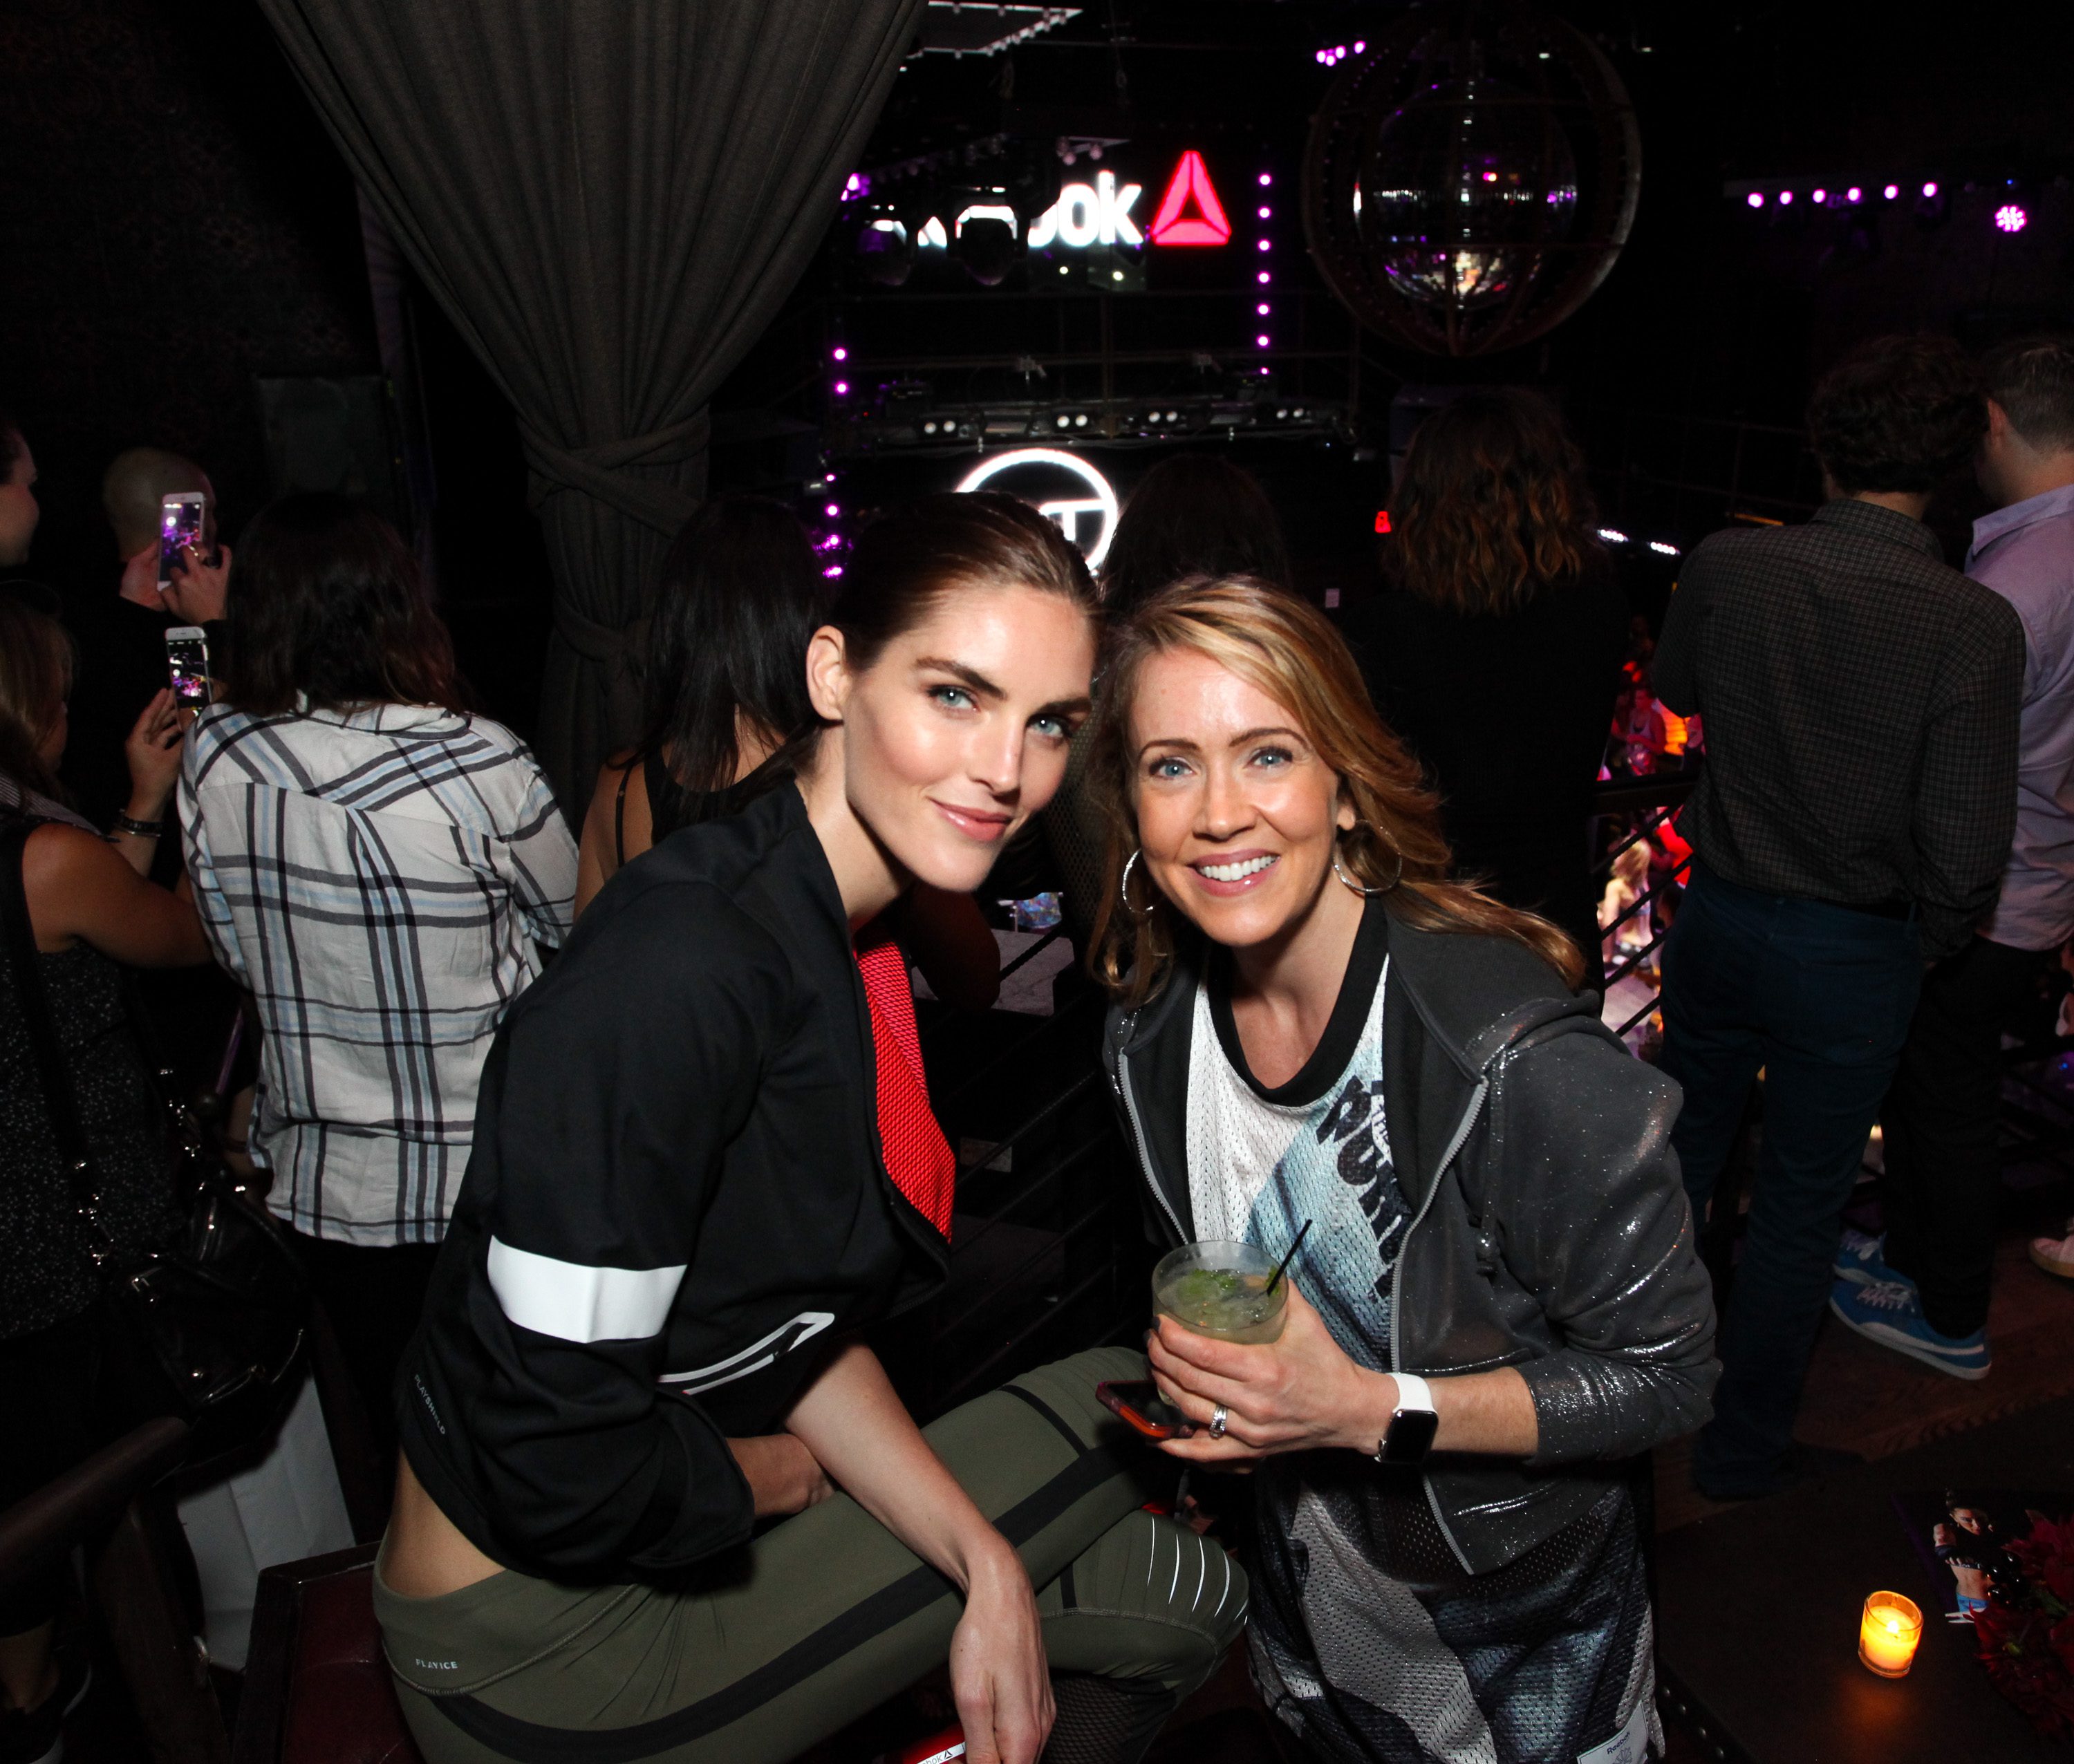 NEW YORK, NY - SEPTEMBER 16: (L-R)Hilary Rhoda and Catherine Marshall attend The Reebok #girlswithgrit Showcase at Marquee on September 16, 2015 in New York City. (Photo by Donald Bowers/Getty Images for Reebok)